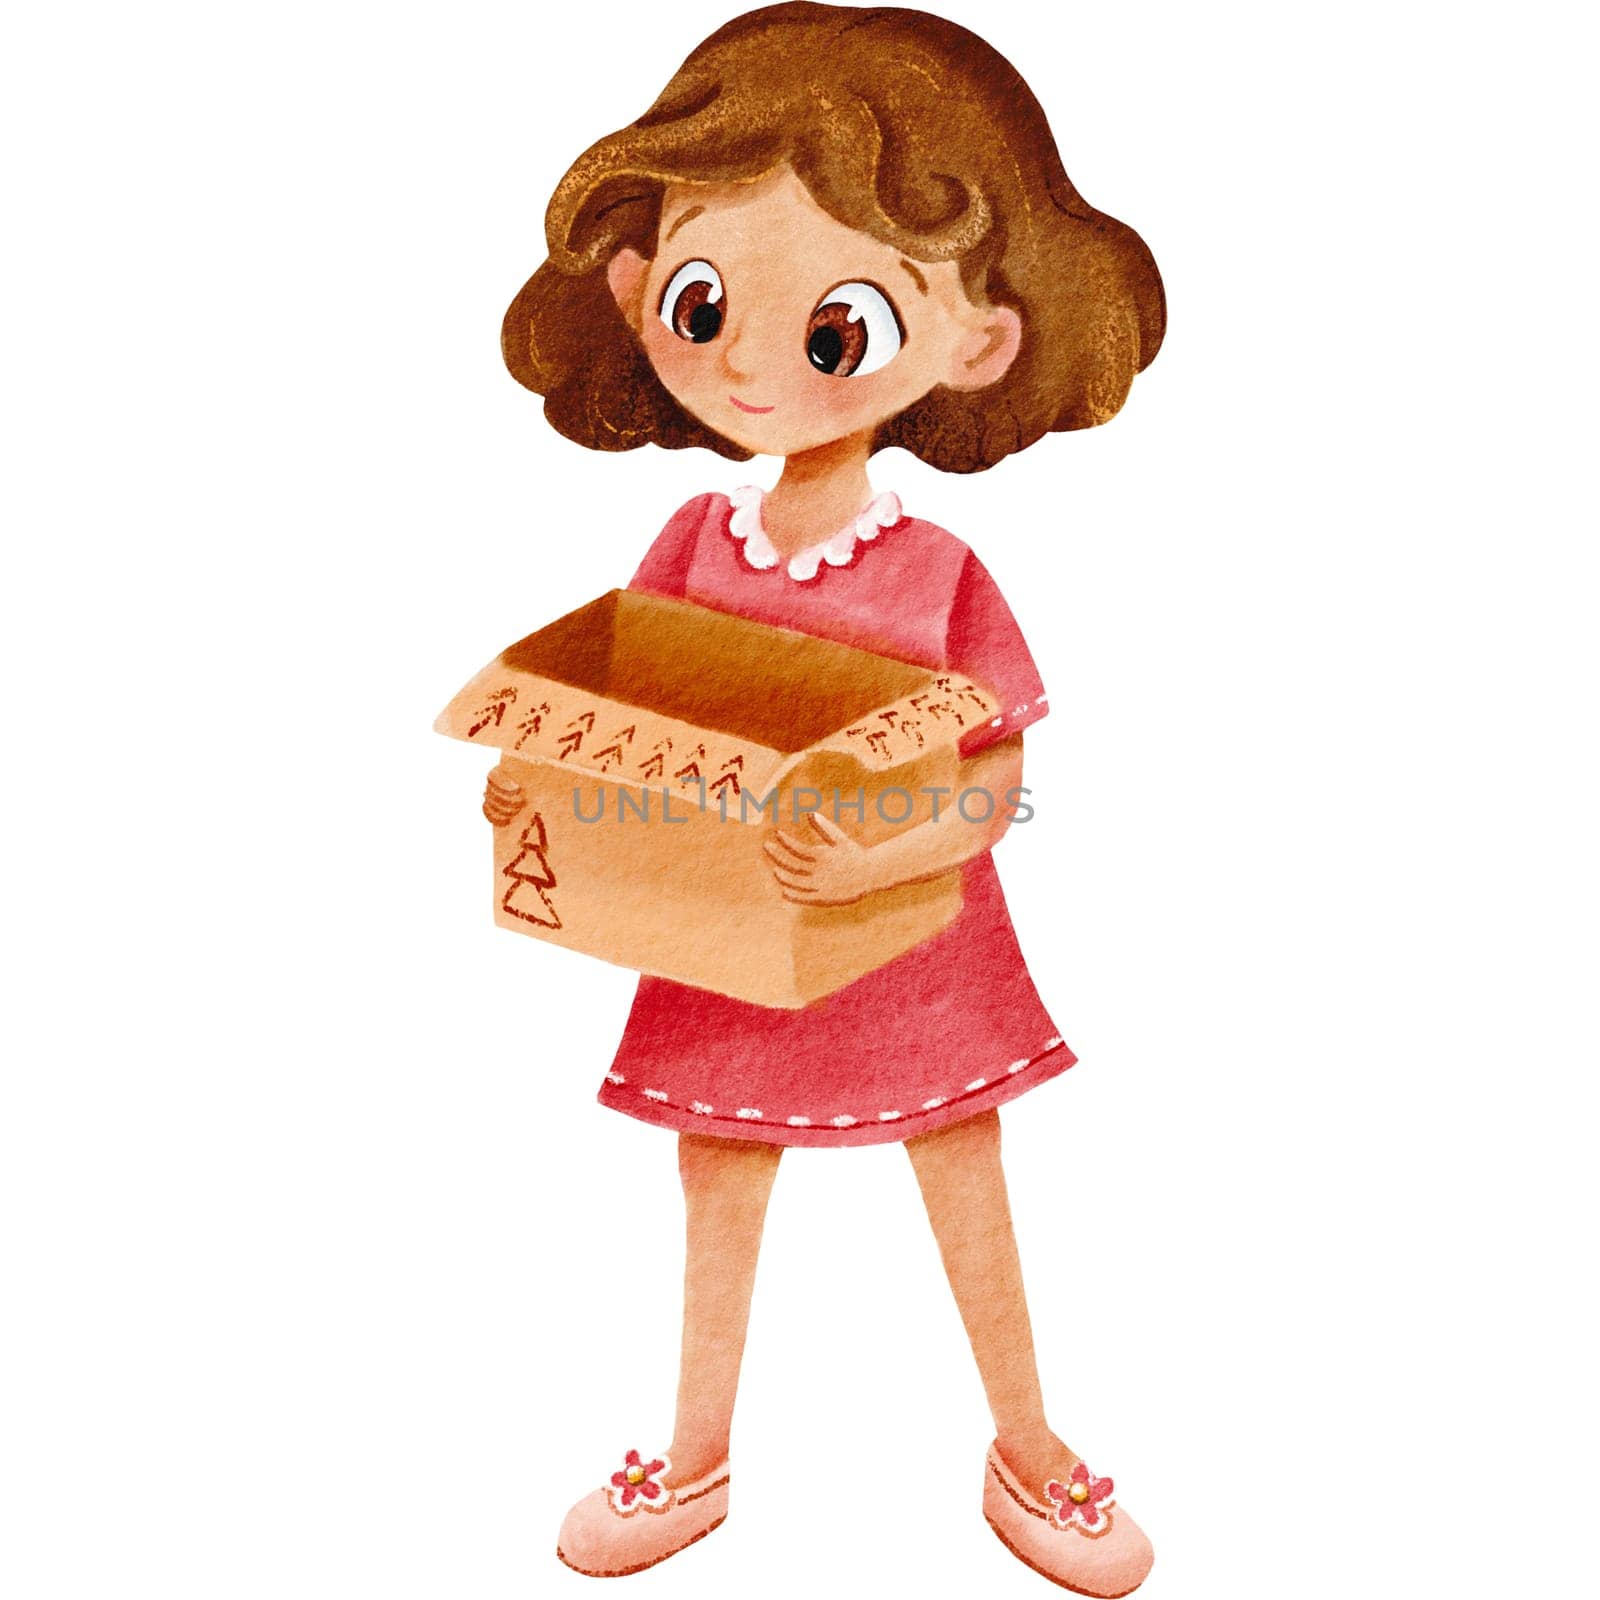 A girl in a pink dress is holding an empty box. Cute baby is smiling. Watercolor isolated illustration. Design for card making, party invitations, logos, greeting cards, posters, D.I.Y. and other. by Art_Mari_Ka